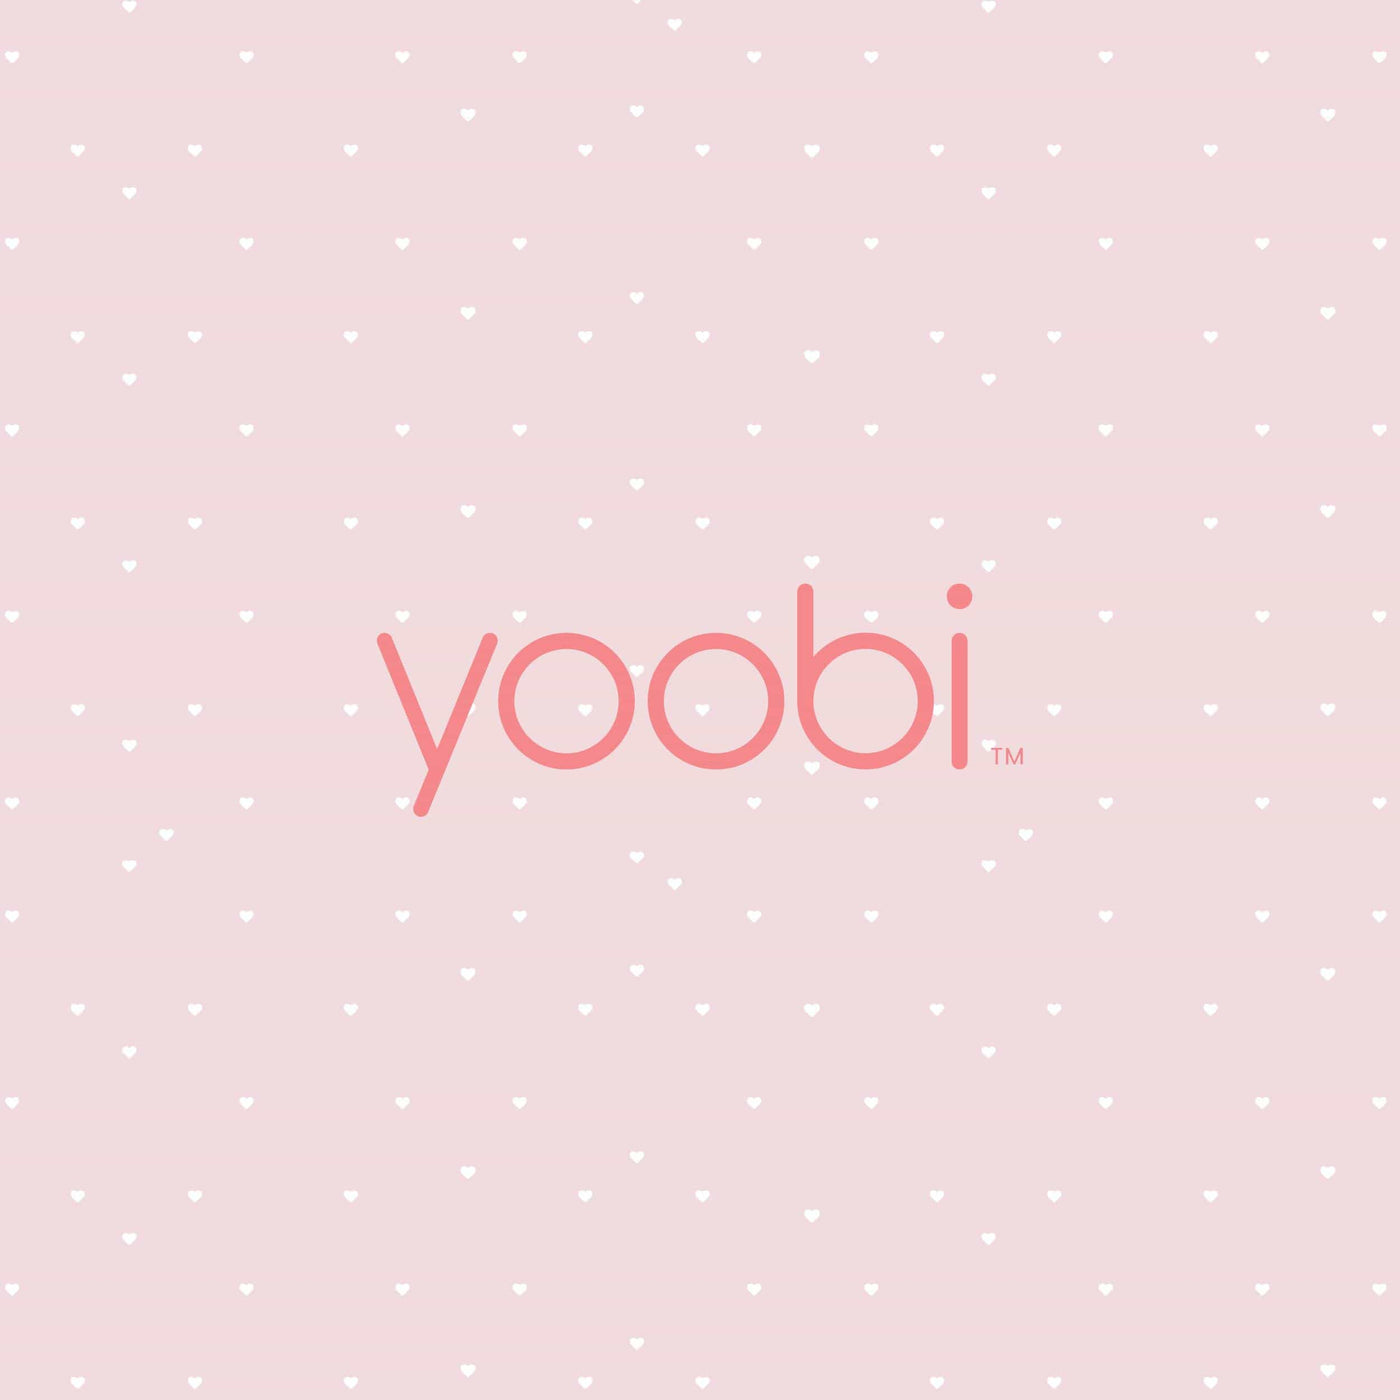 yoobi gift card with pink background and white polka dots